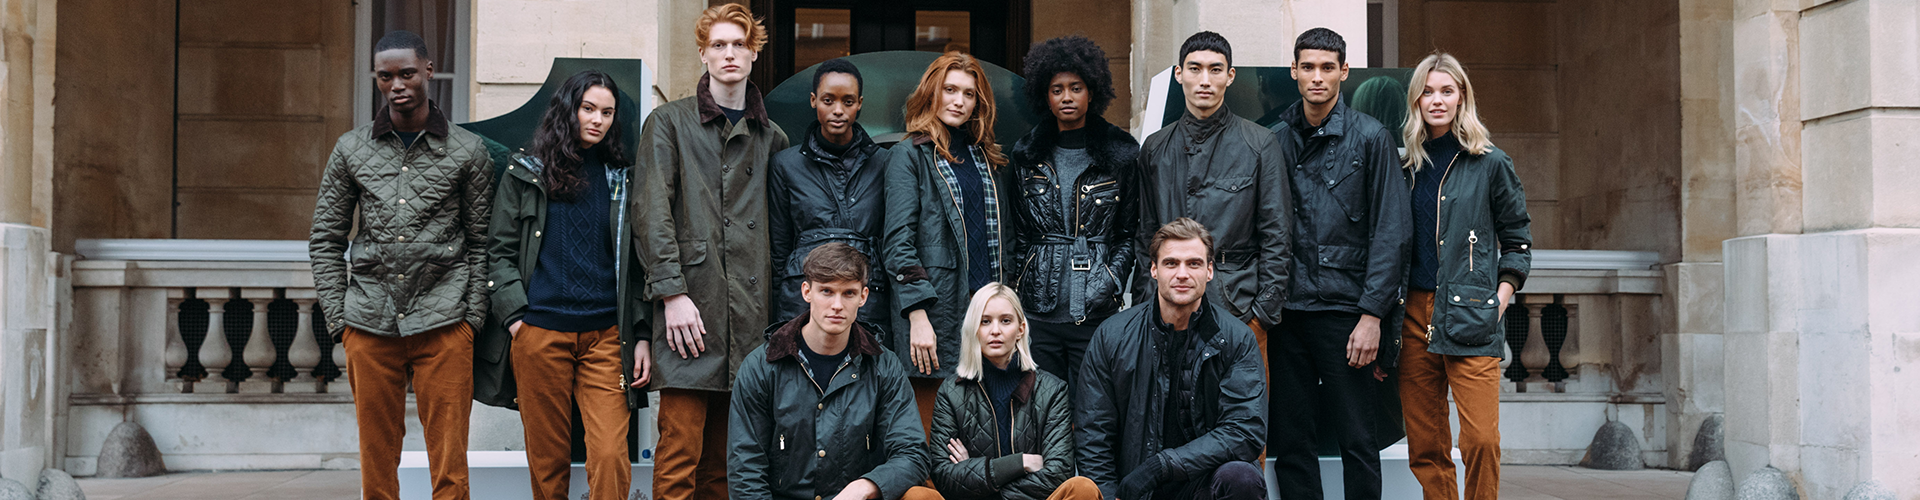 barbour 125 years